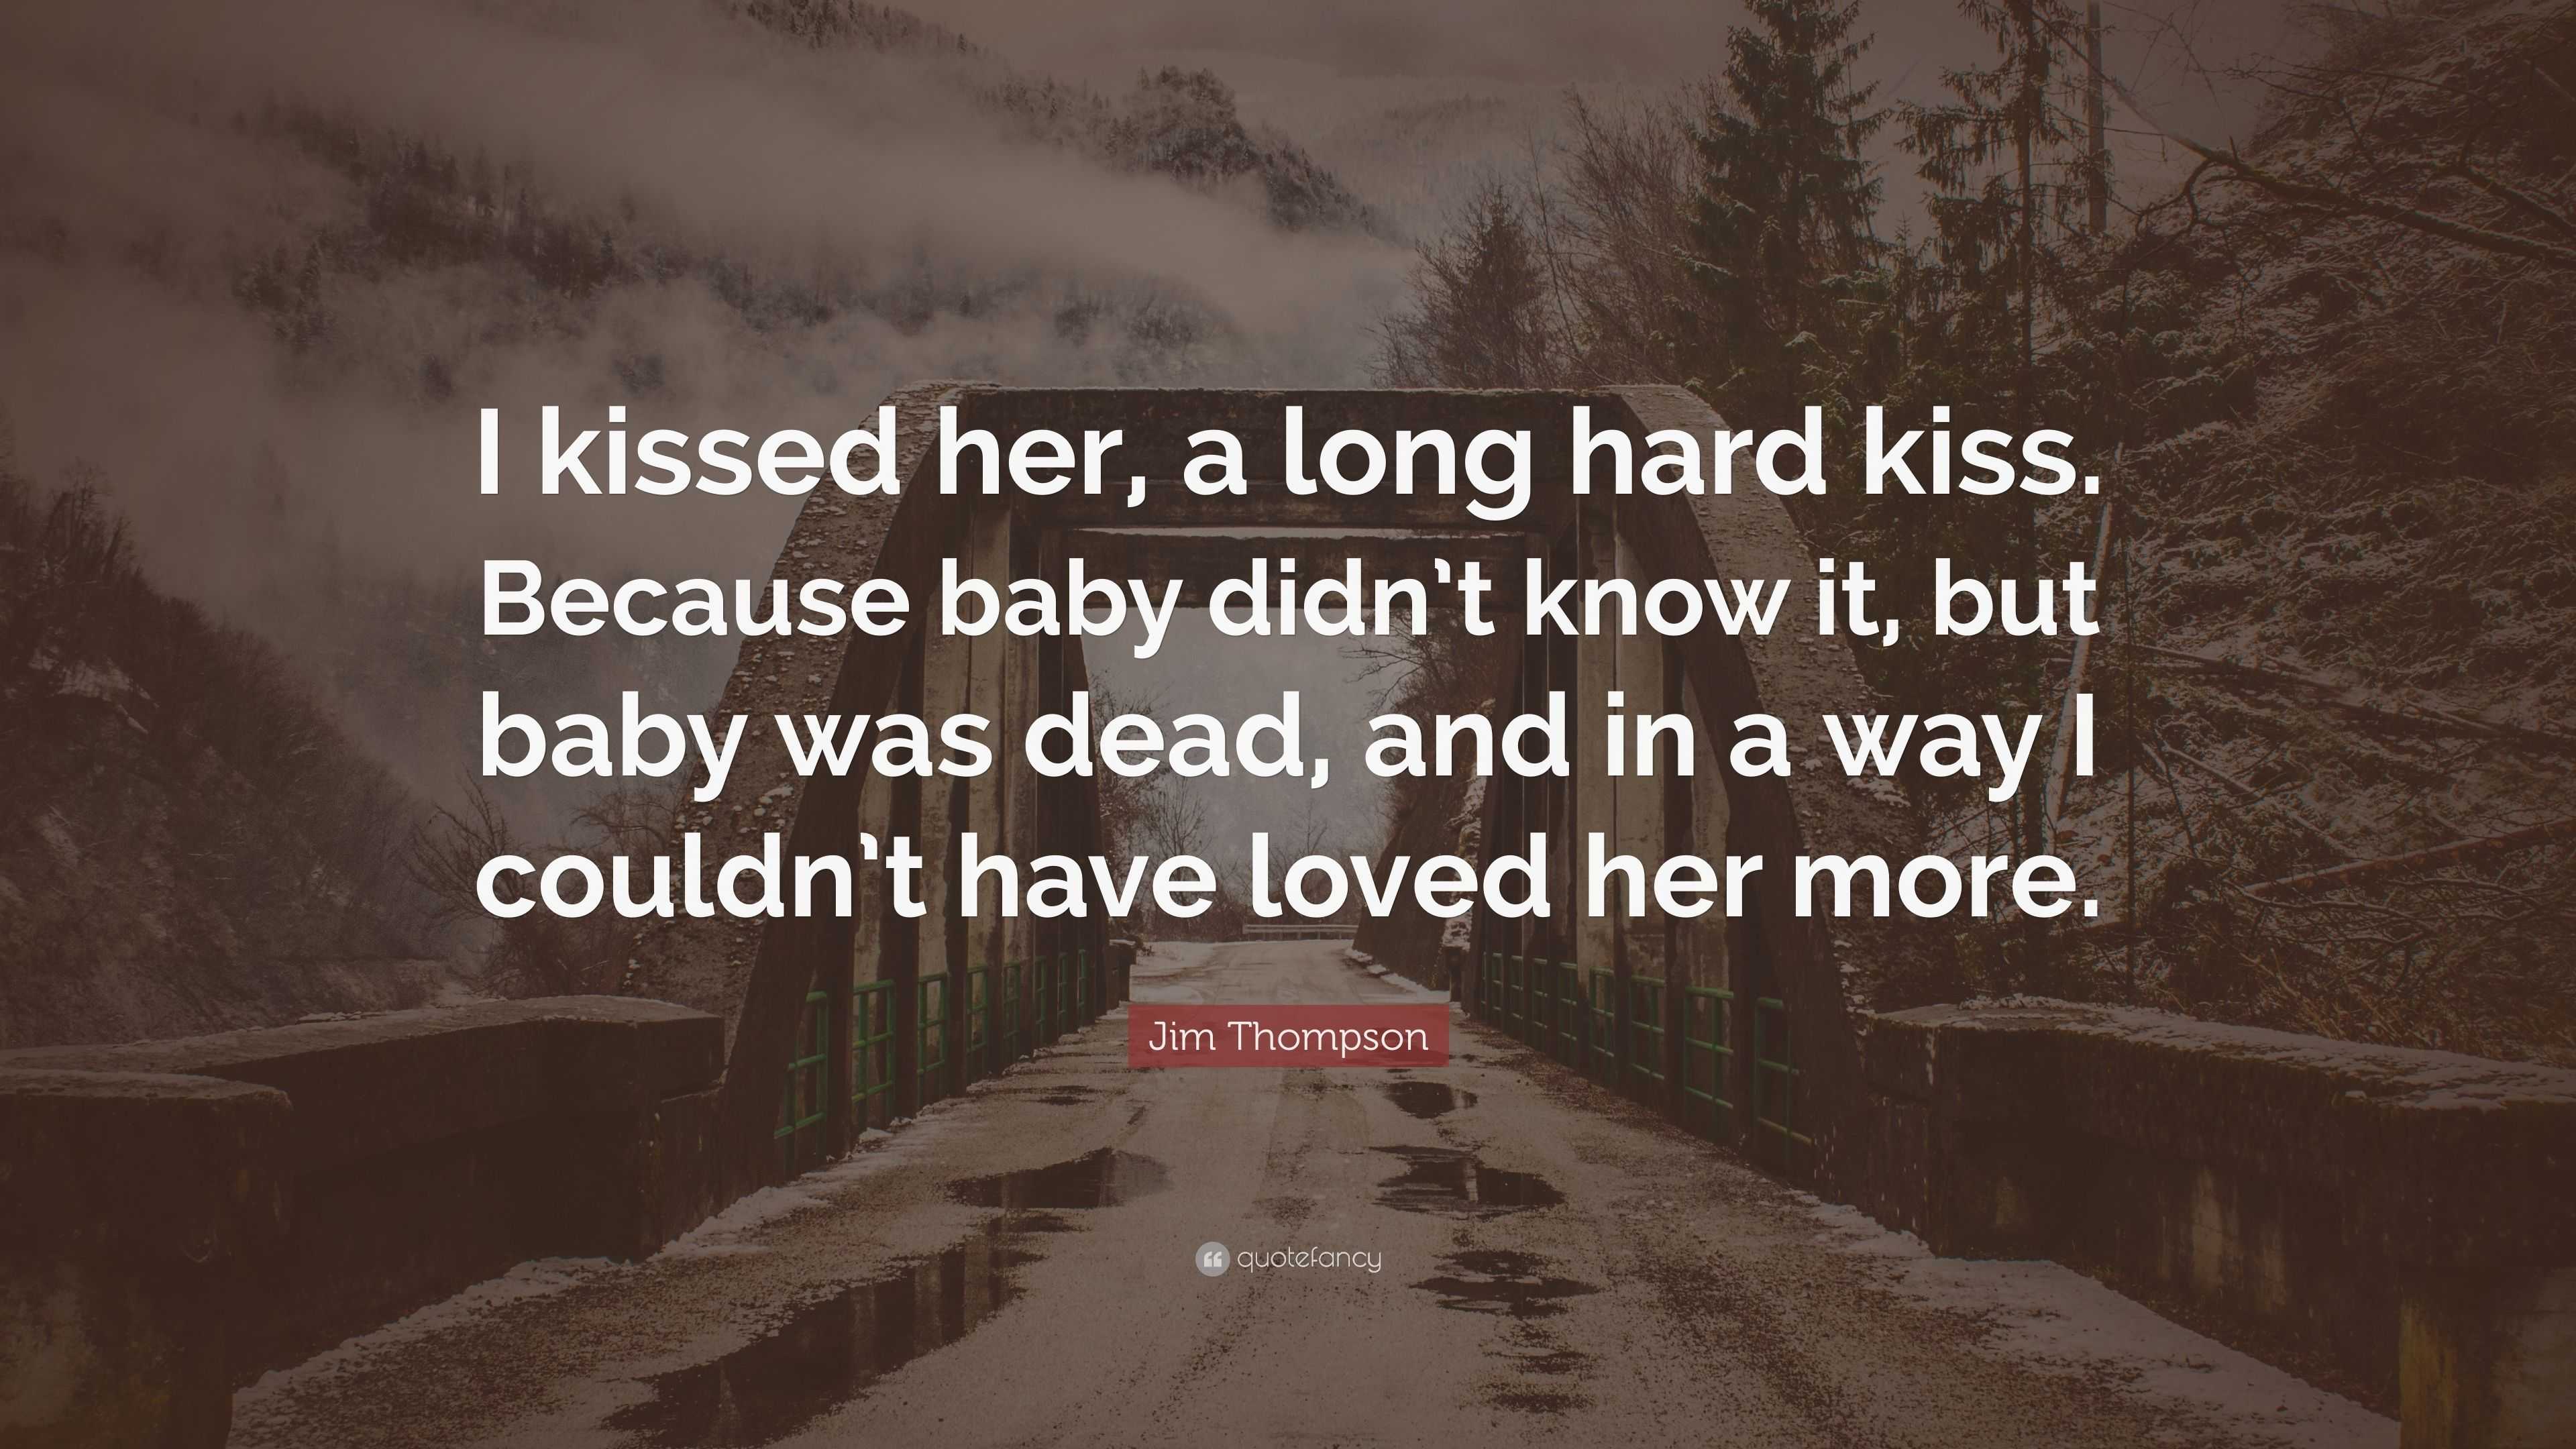 Jim Thompson Quote: “I kissed her, a